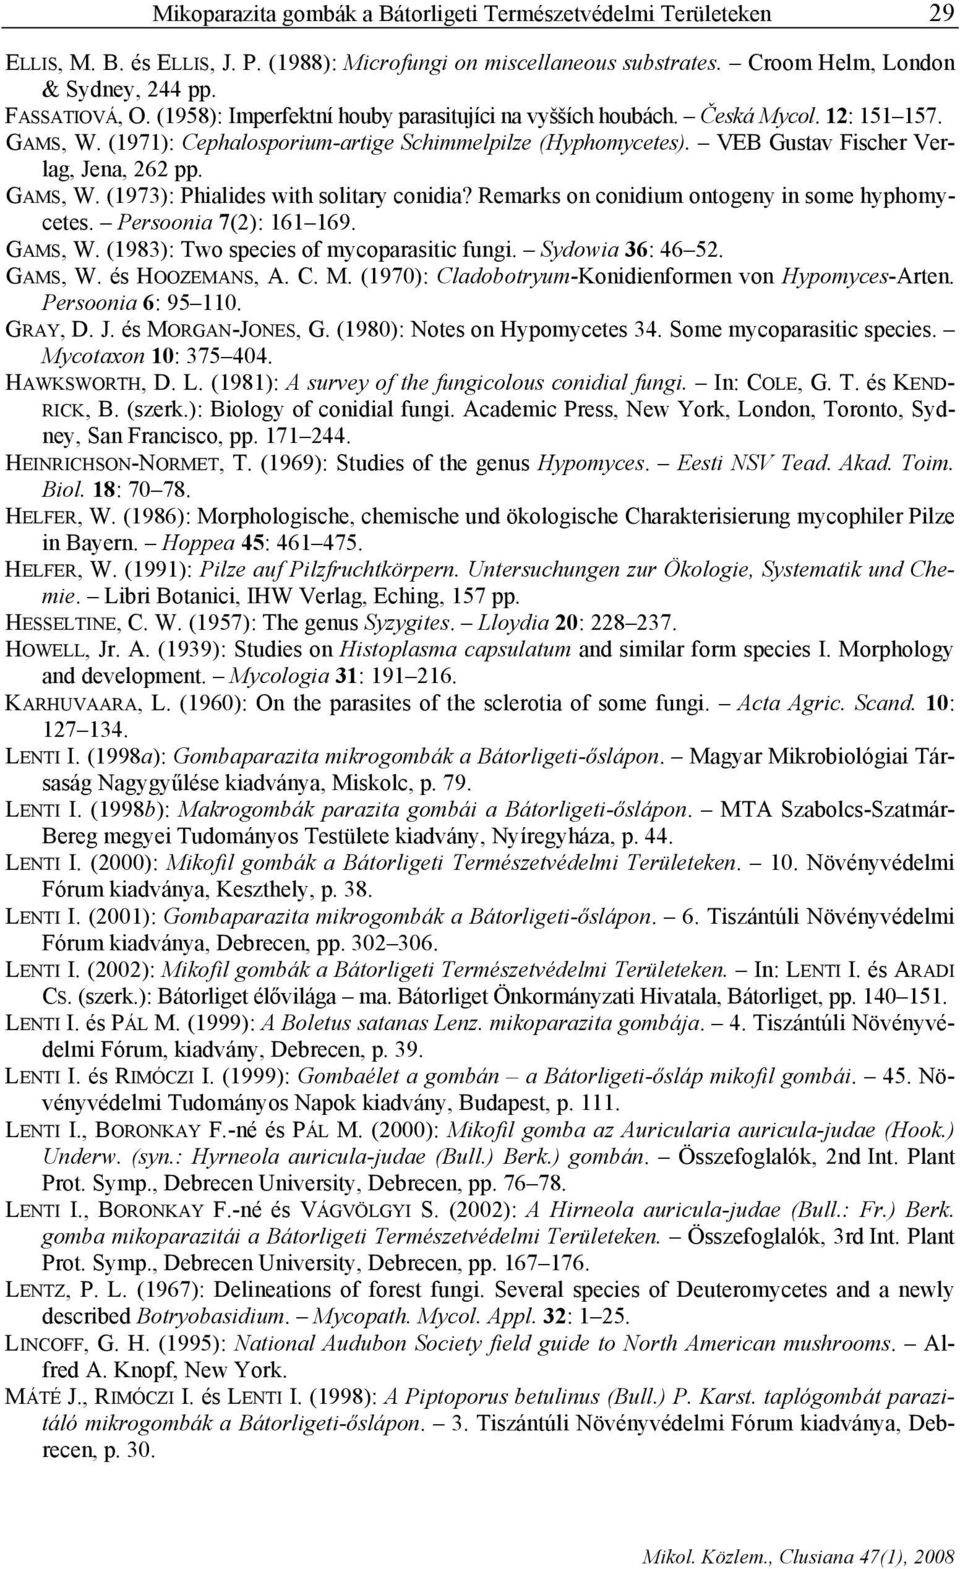 GAMS, W. (1973): Phialides with solitary conidia? Remarks on conidium ontogeny in some hyphomycetes. Persoonia 7(2): 161 169. GAMS, W. (1983): Two species of mycoparasitic fungi. Sydowia 36: 46 52.